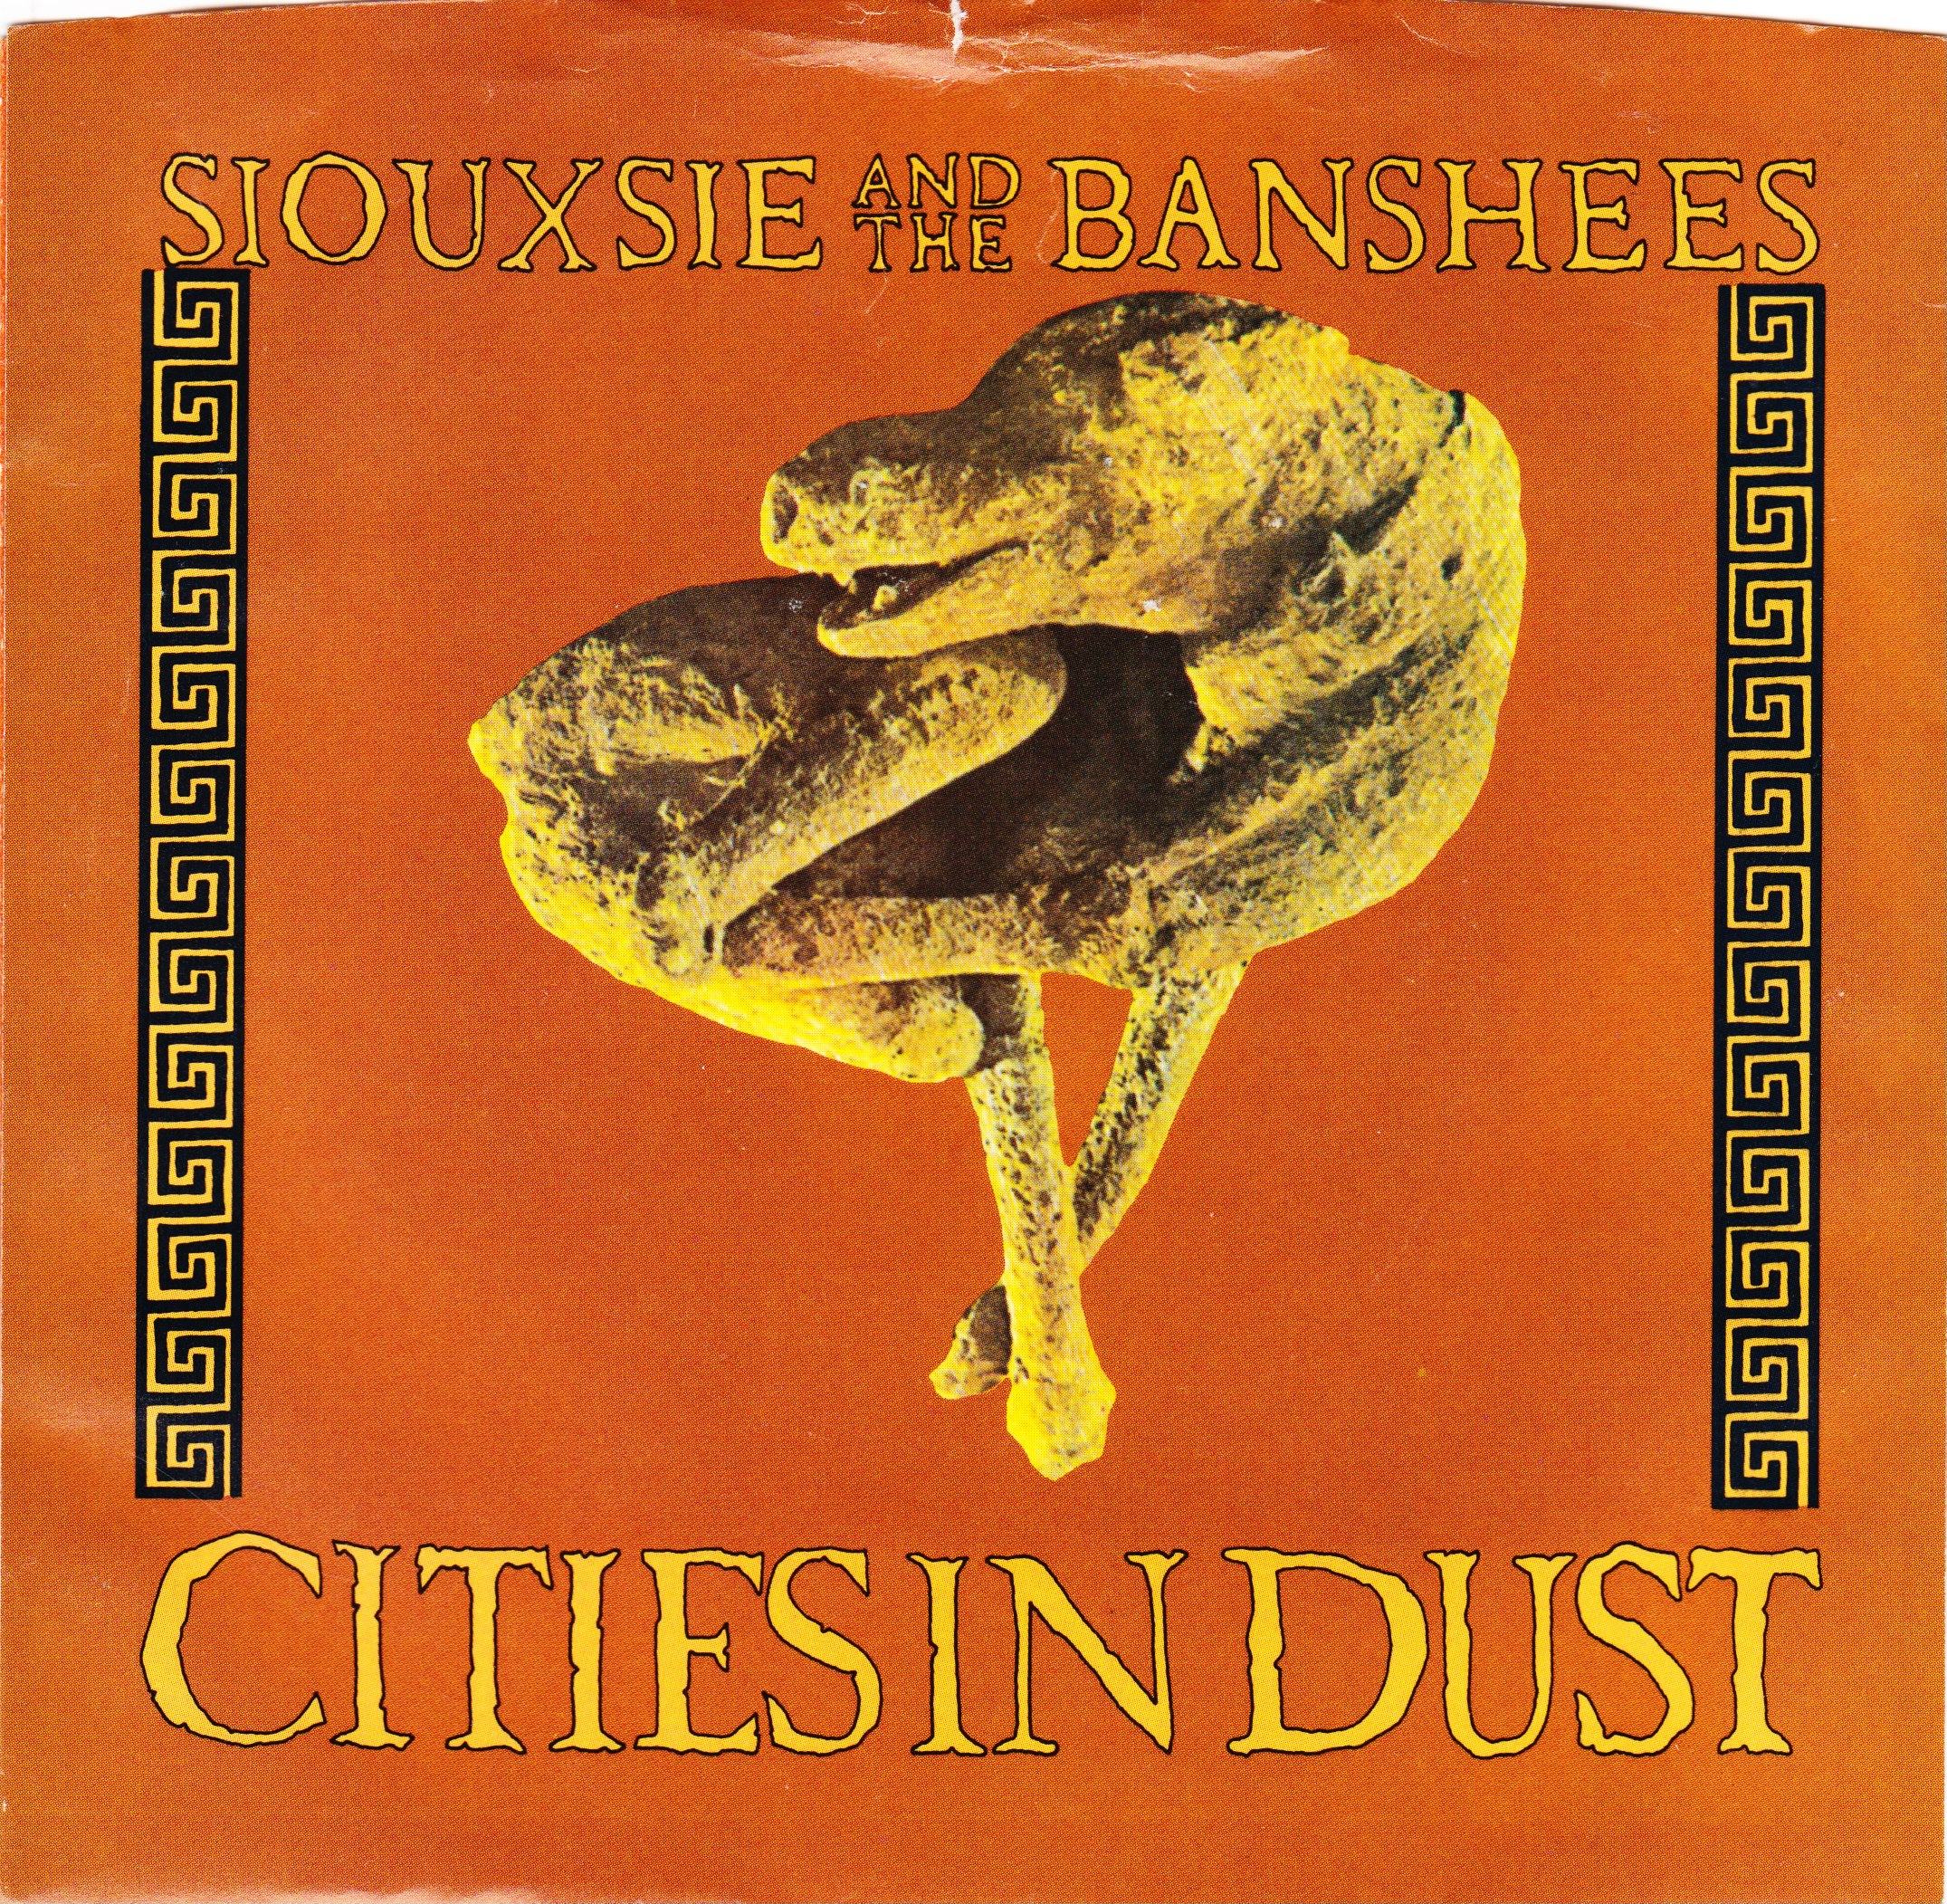 CITIES IN DUST cover art